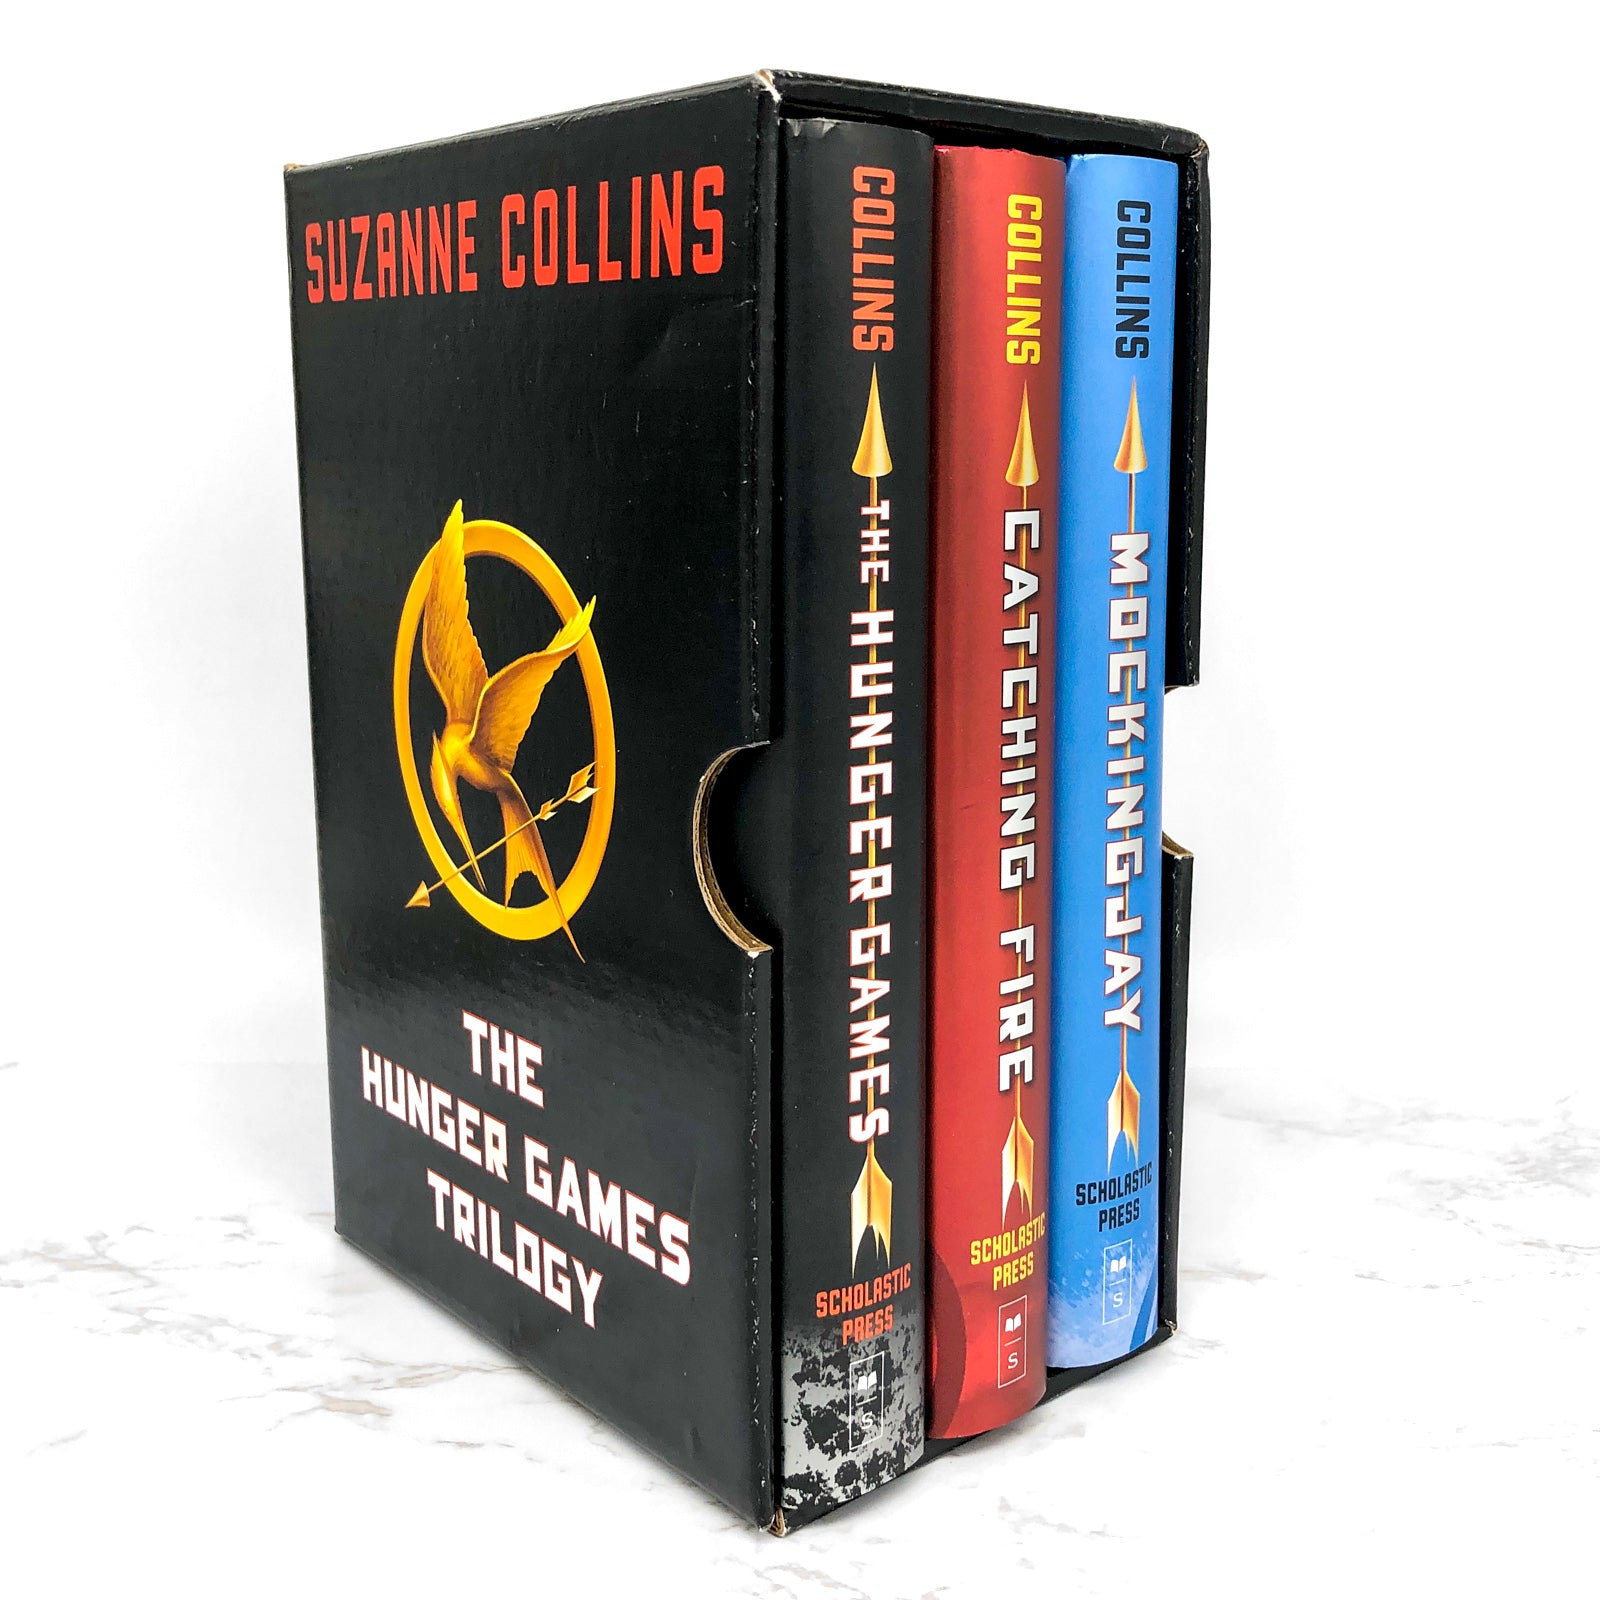 The Hunger Games by COLLINS, Suzanne, Search for rare books